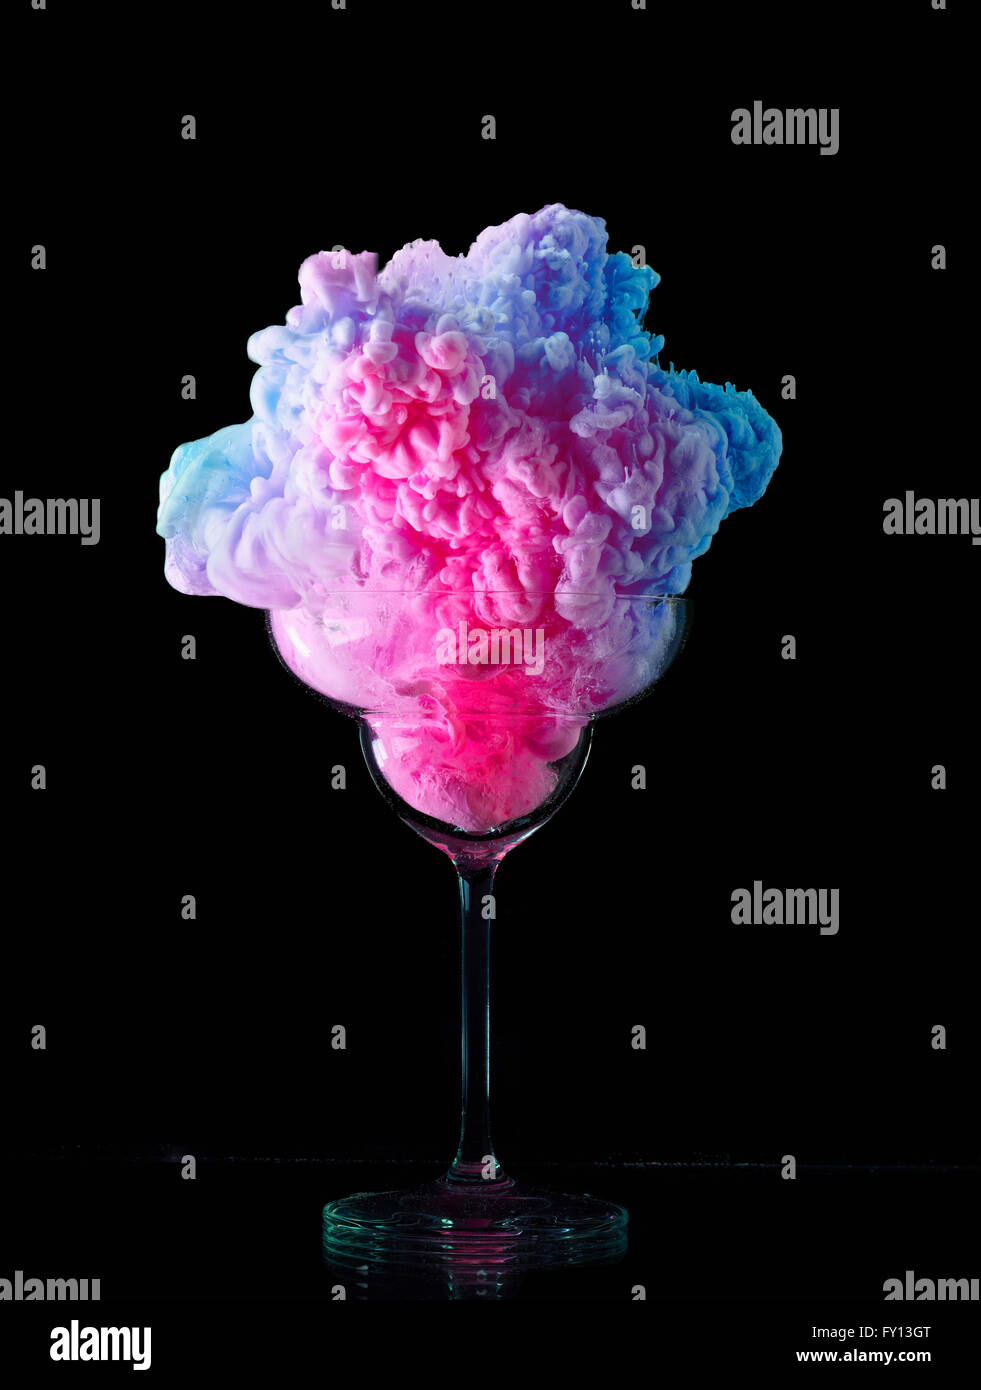 Abstract image of multi colored frozen yogurt in glass against black background Stock Photo